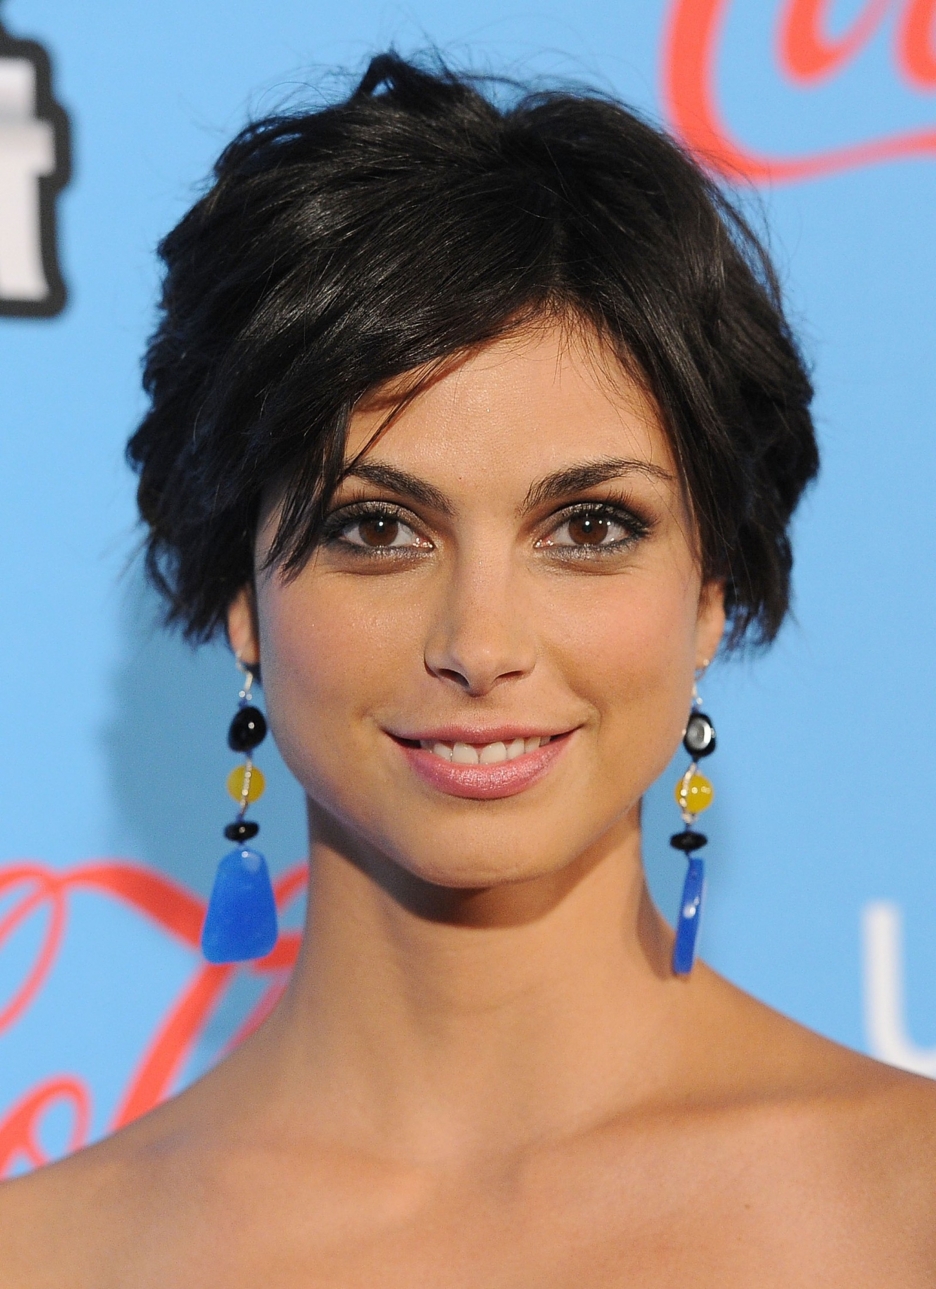 Morena Baccarin Photos | Tv Series Posters and Cast